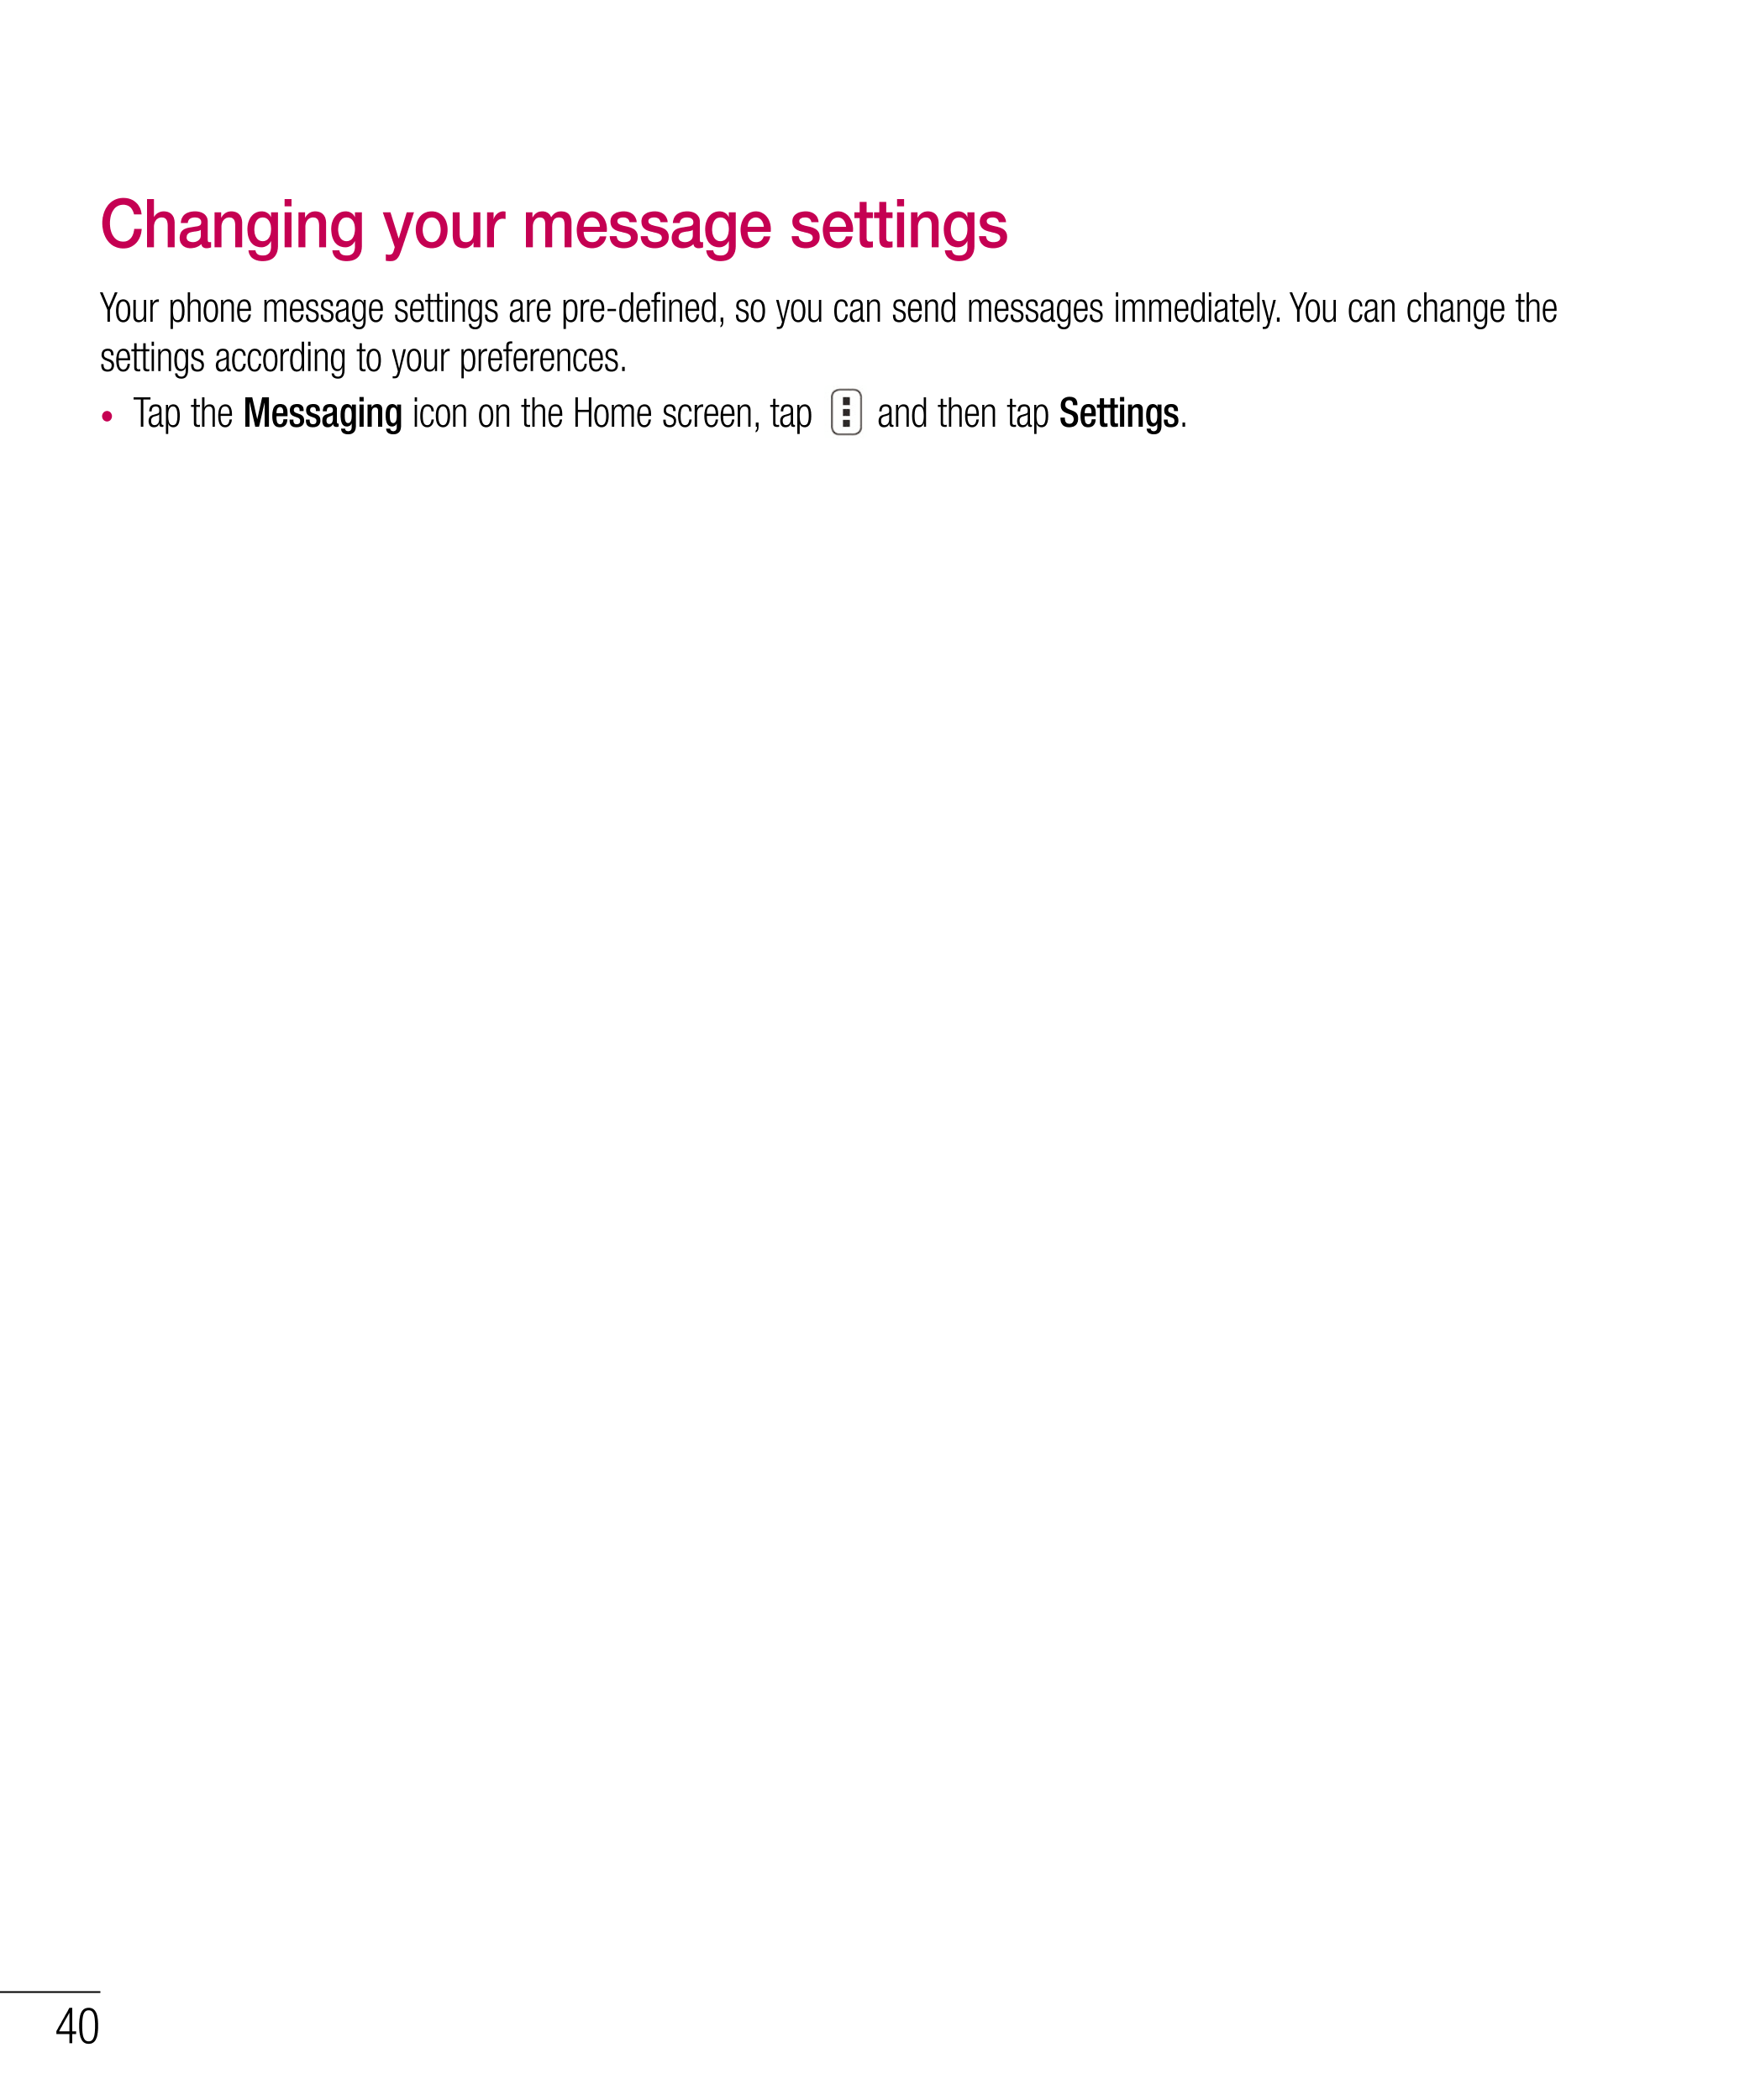 Changing your message settings
Your phone message settings are pre-defined, so you can send messages immediately. You can change